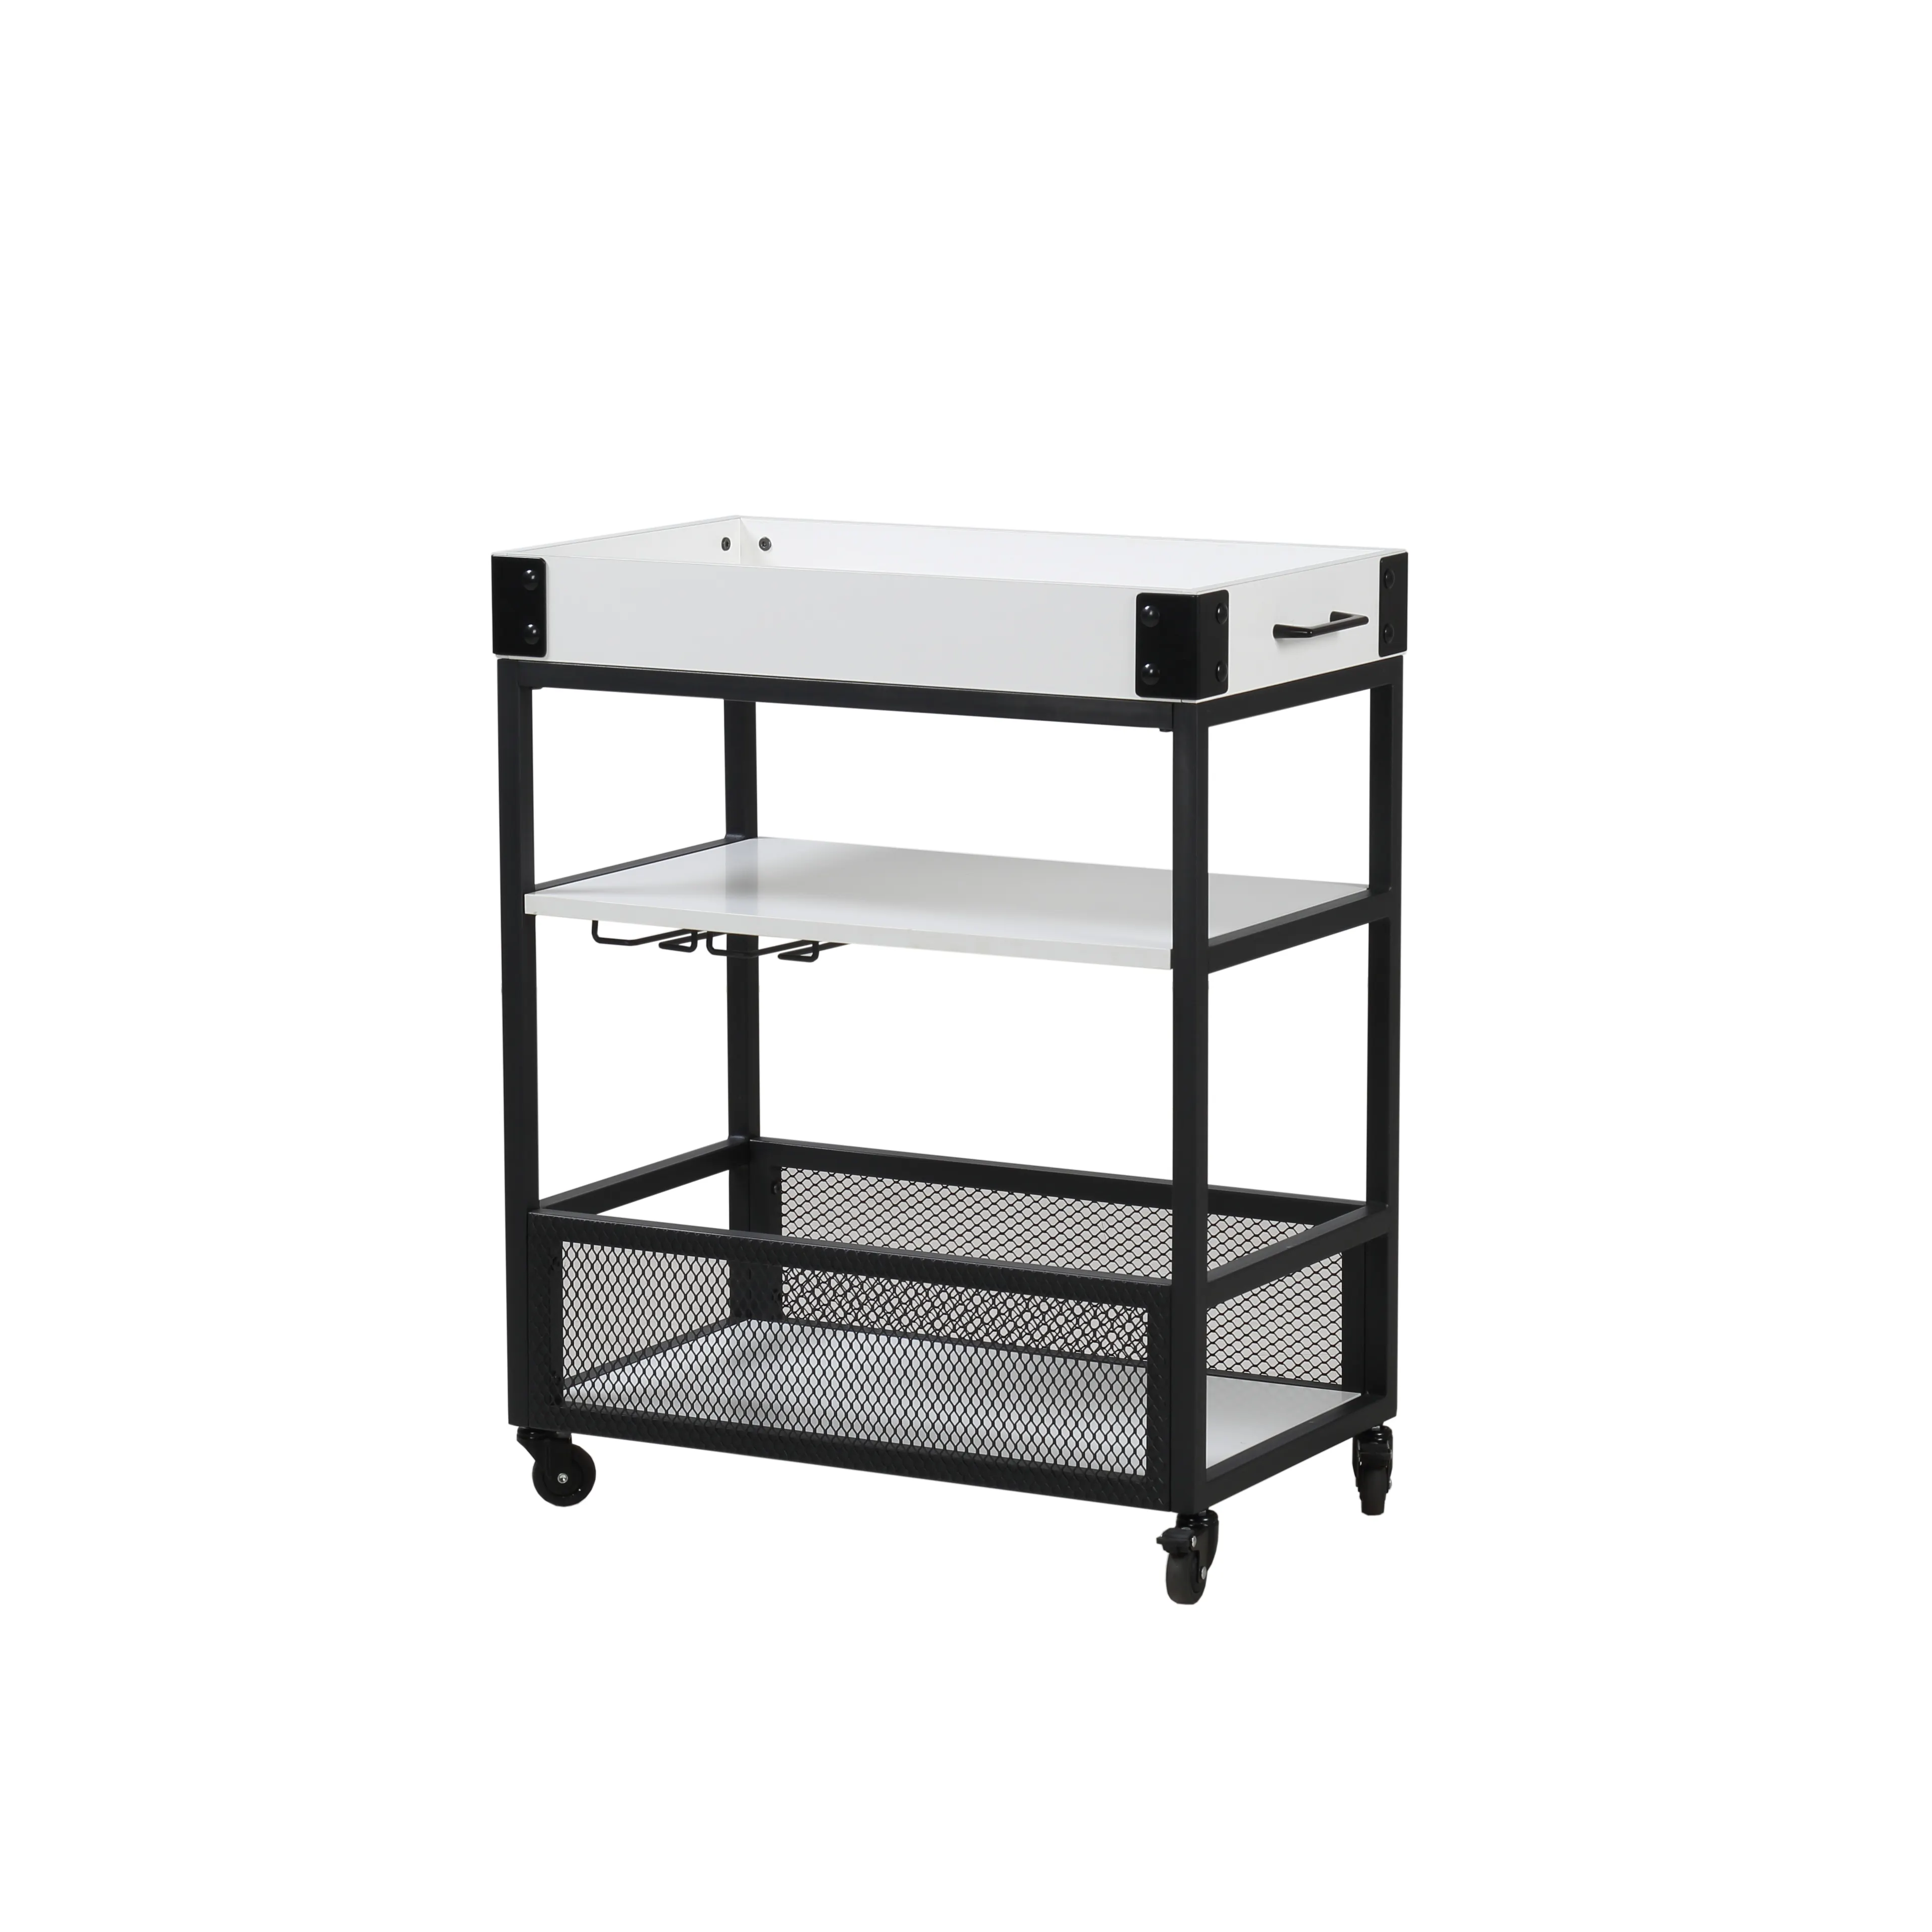 Factory price custom made hotel restaurant food service trolley with wheels